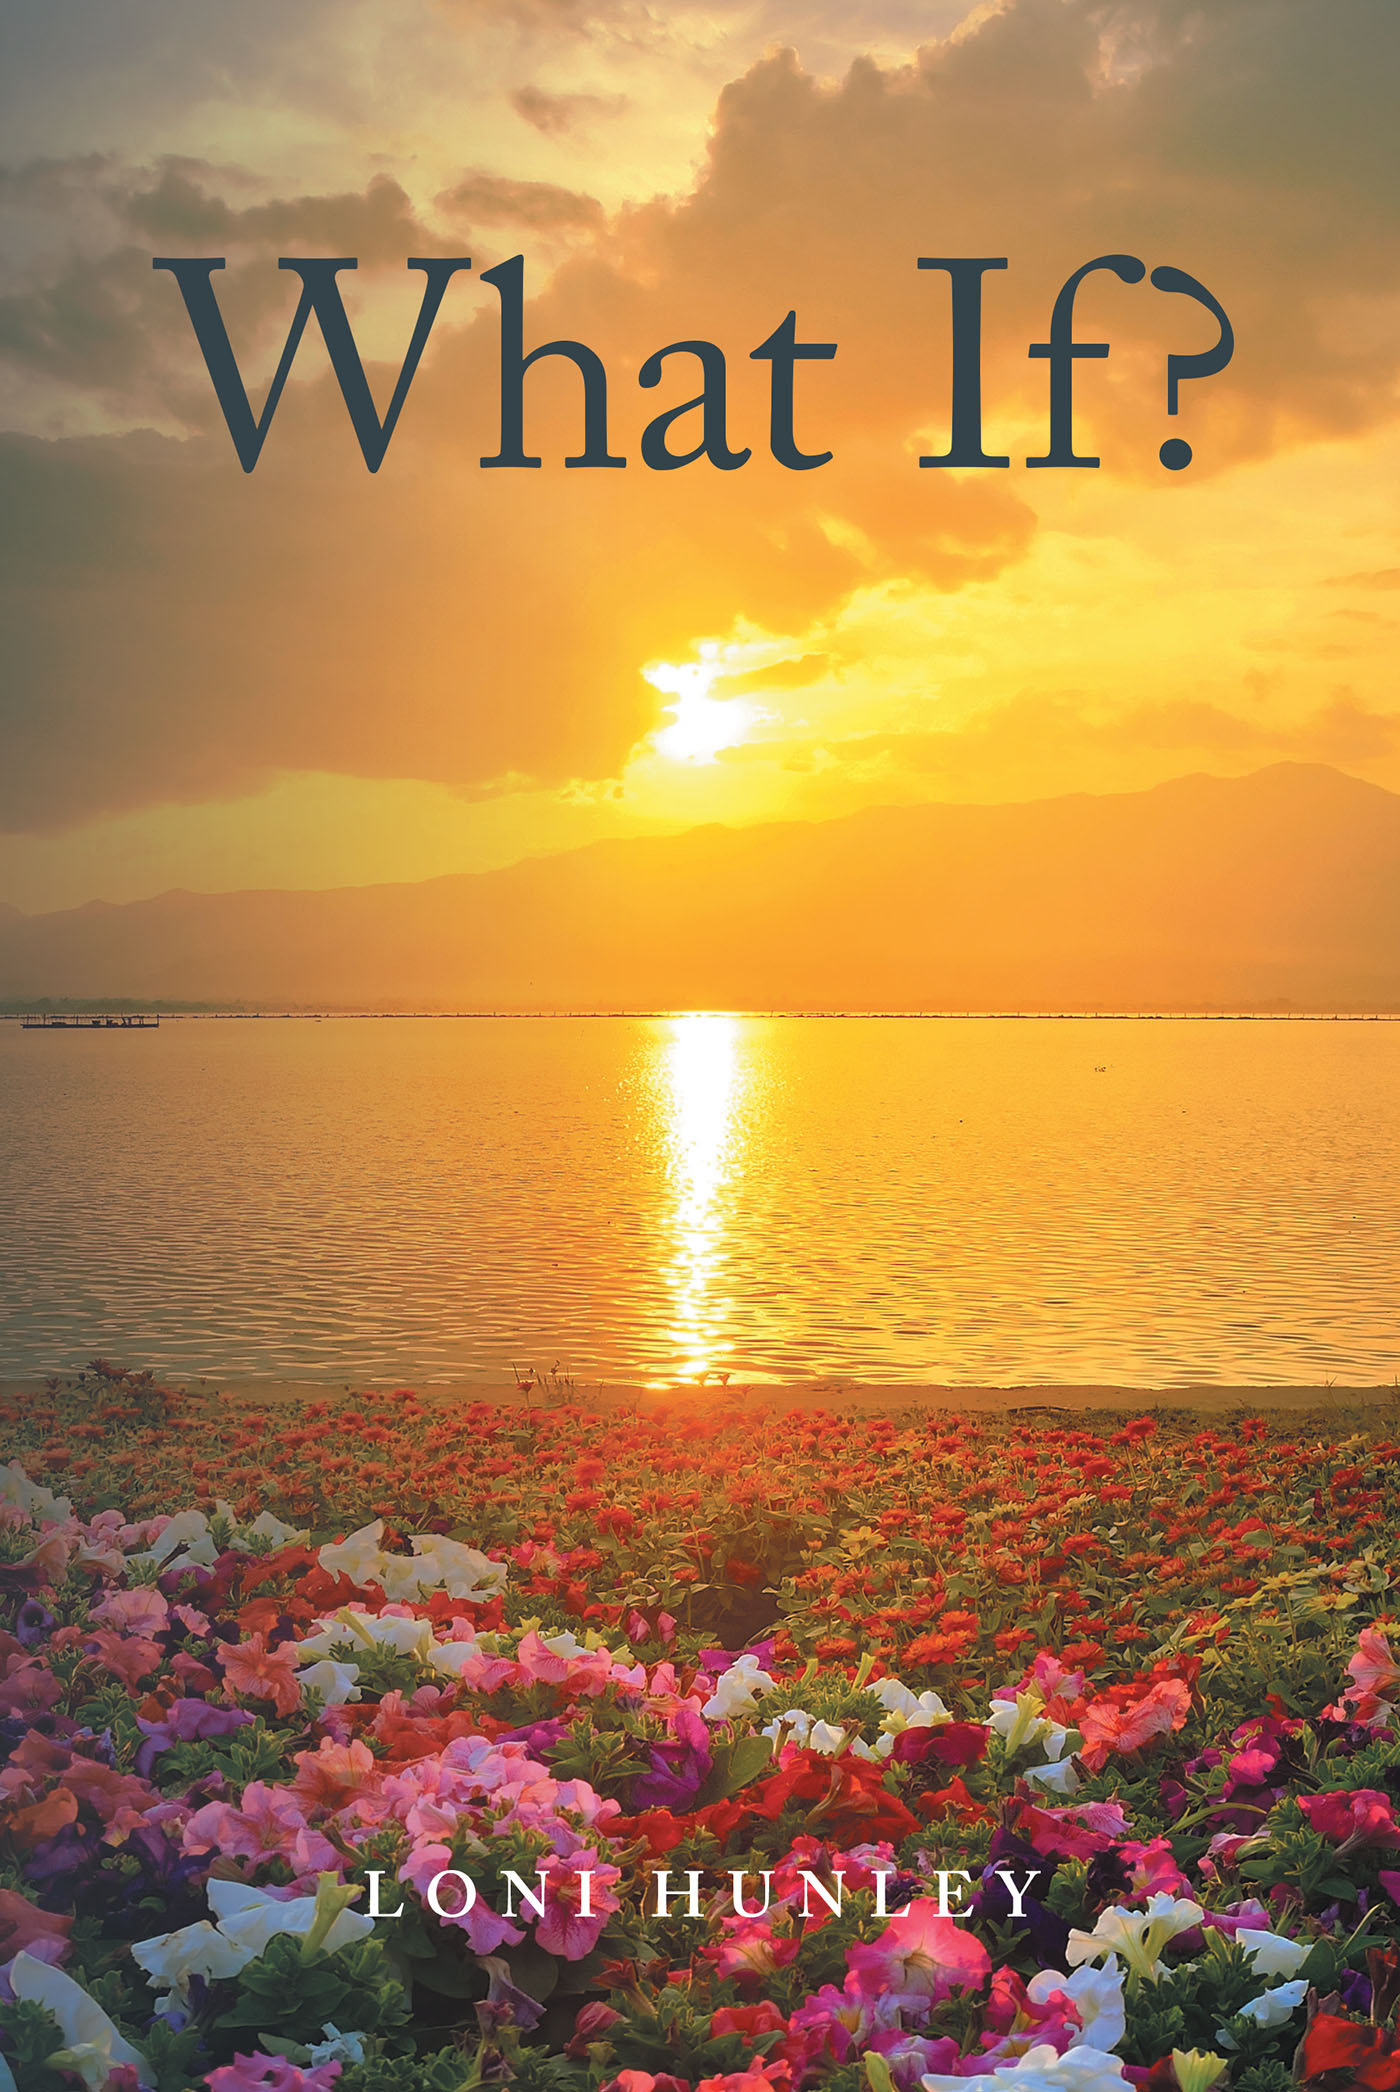 Loni Hunley’s Newly Released "What If?" is an Inspirational Guide to Applying Biblical Wisdom in Today’s Turbulent World